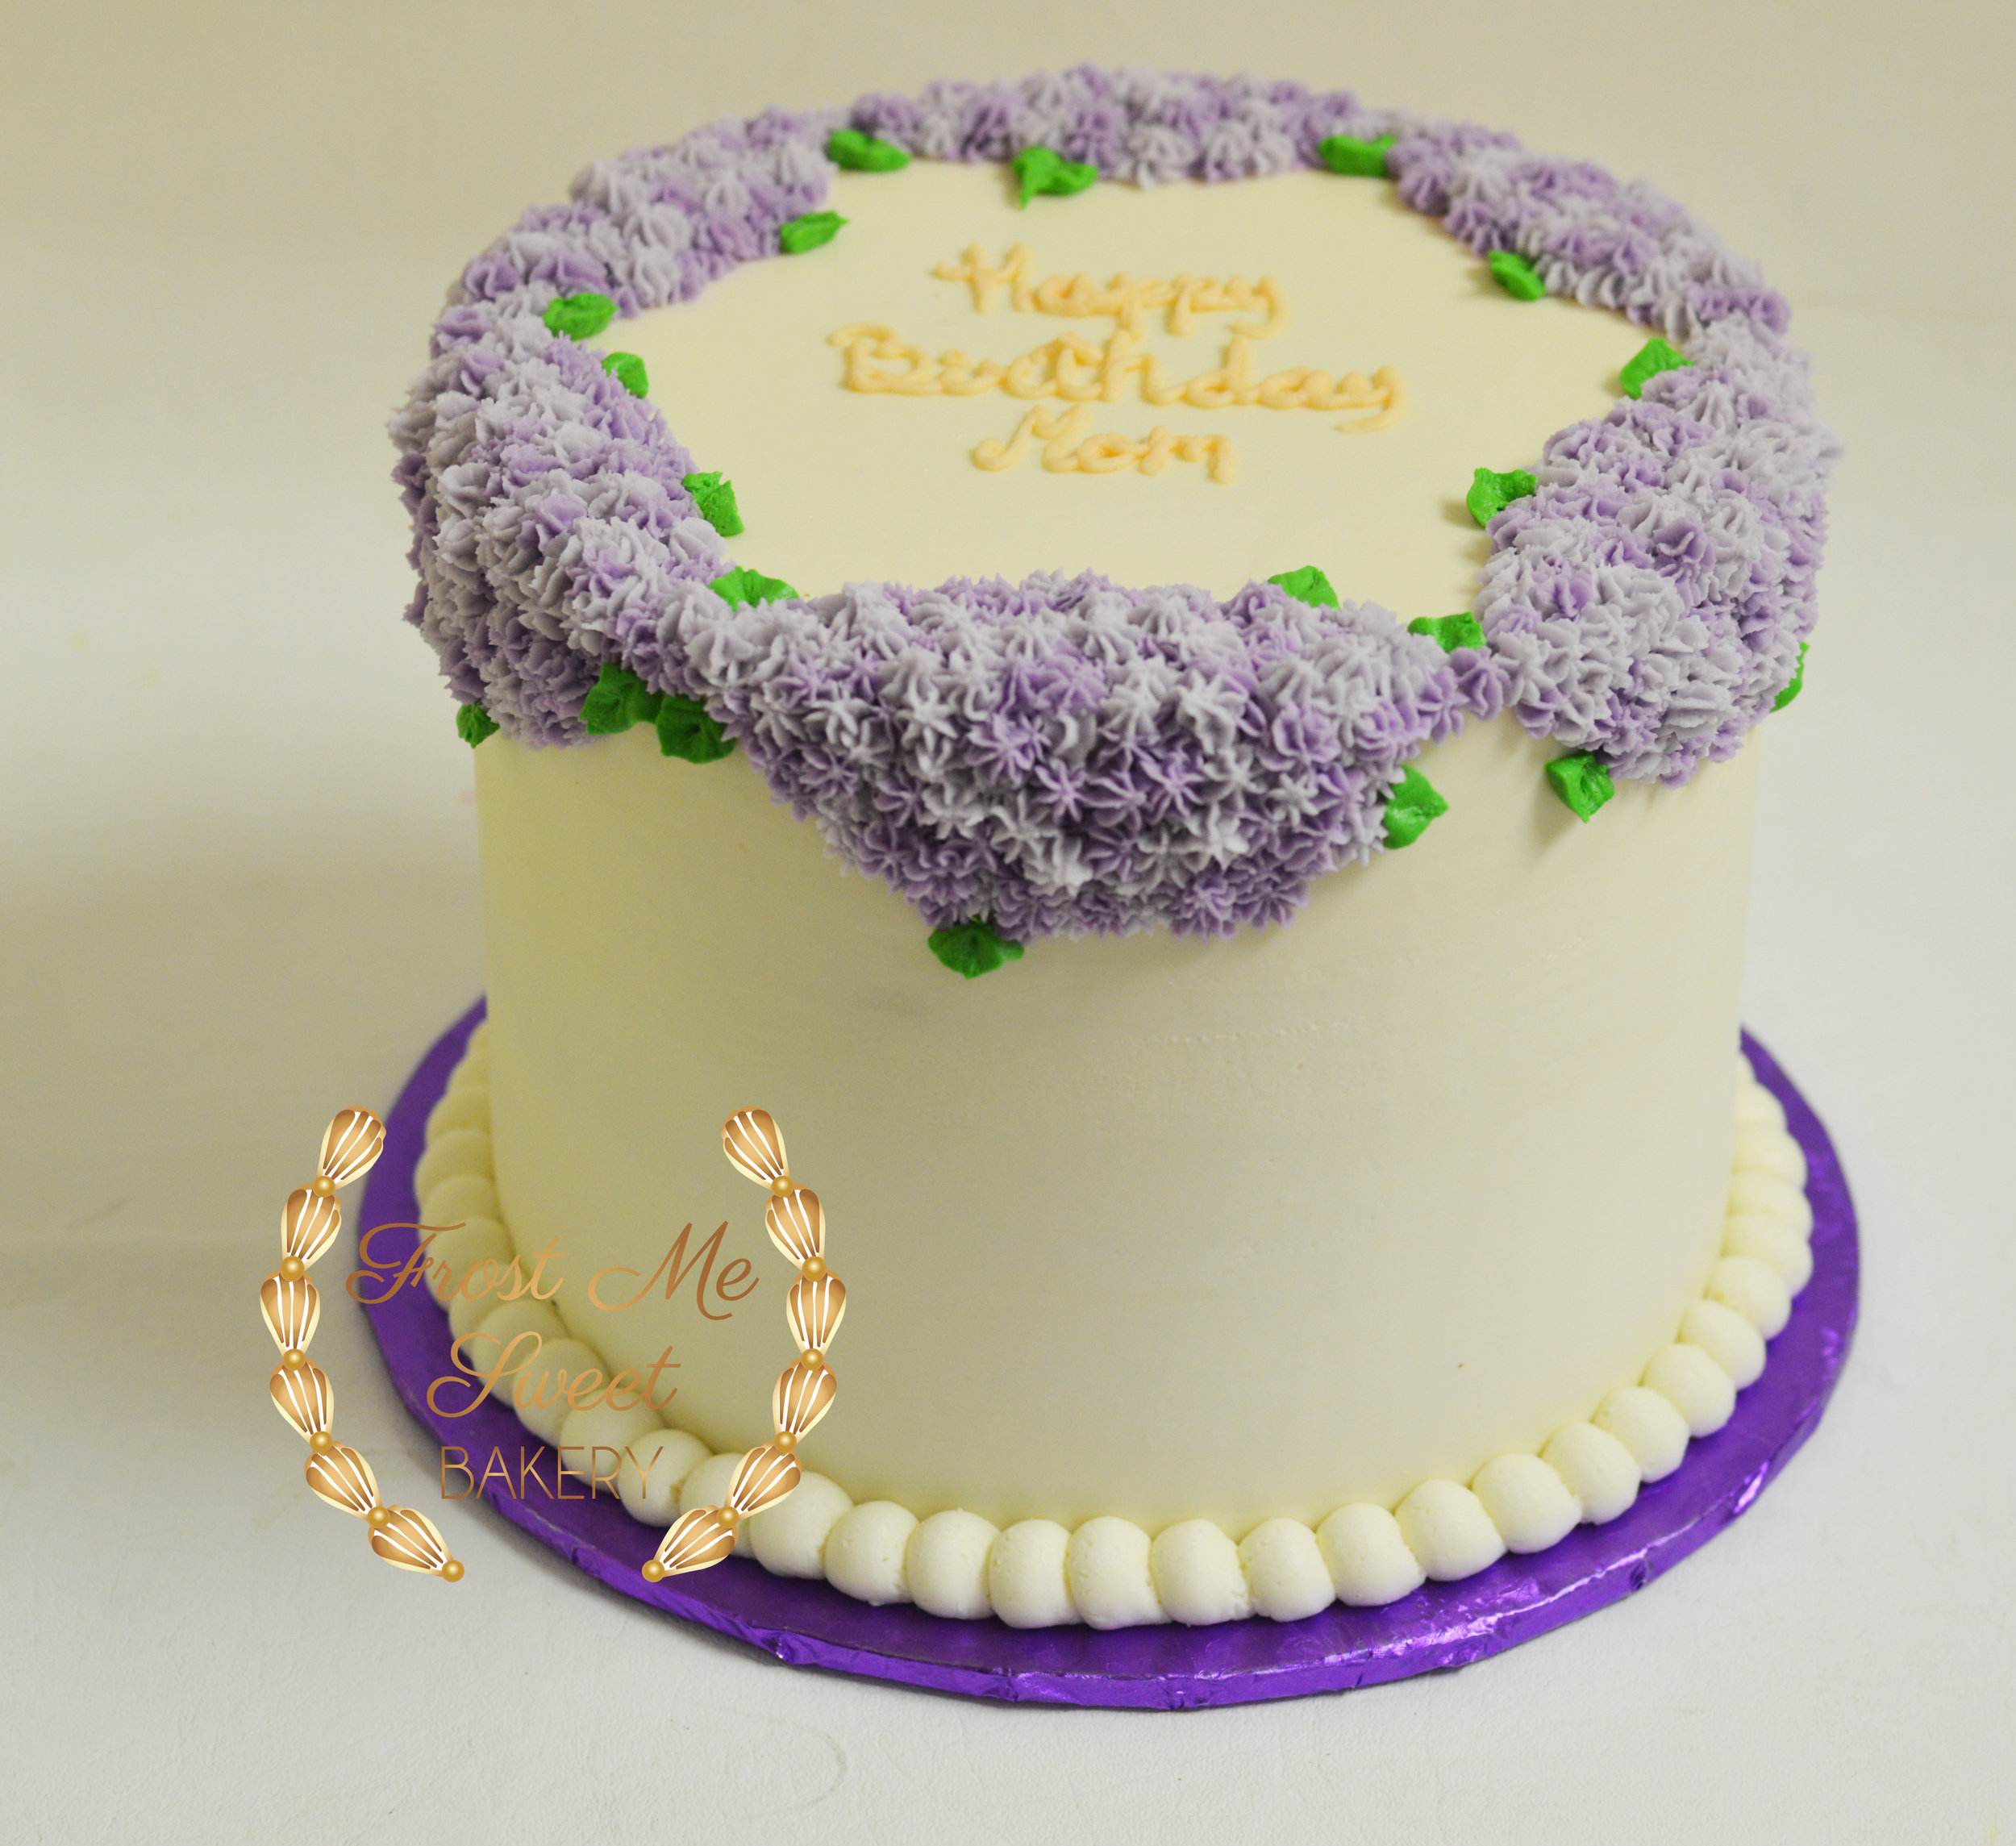 Ladies' Birthday Cakes | Yummy Mummys Cakes – Cakes for all occasions!